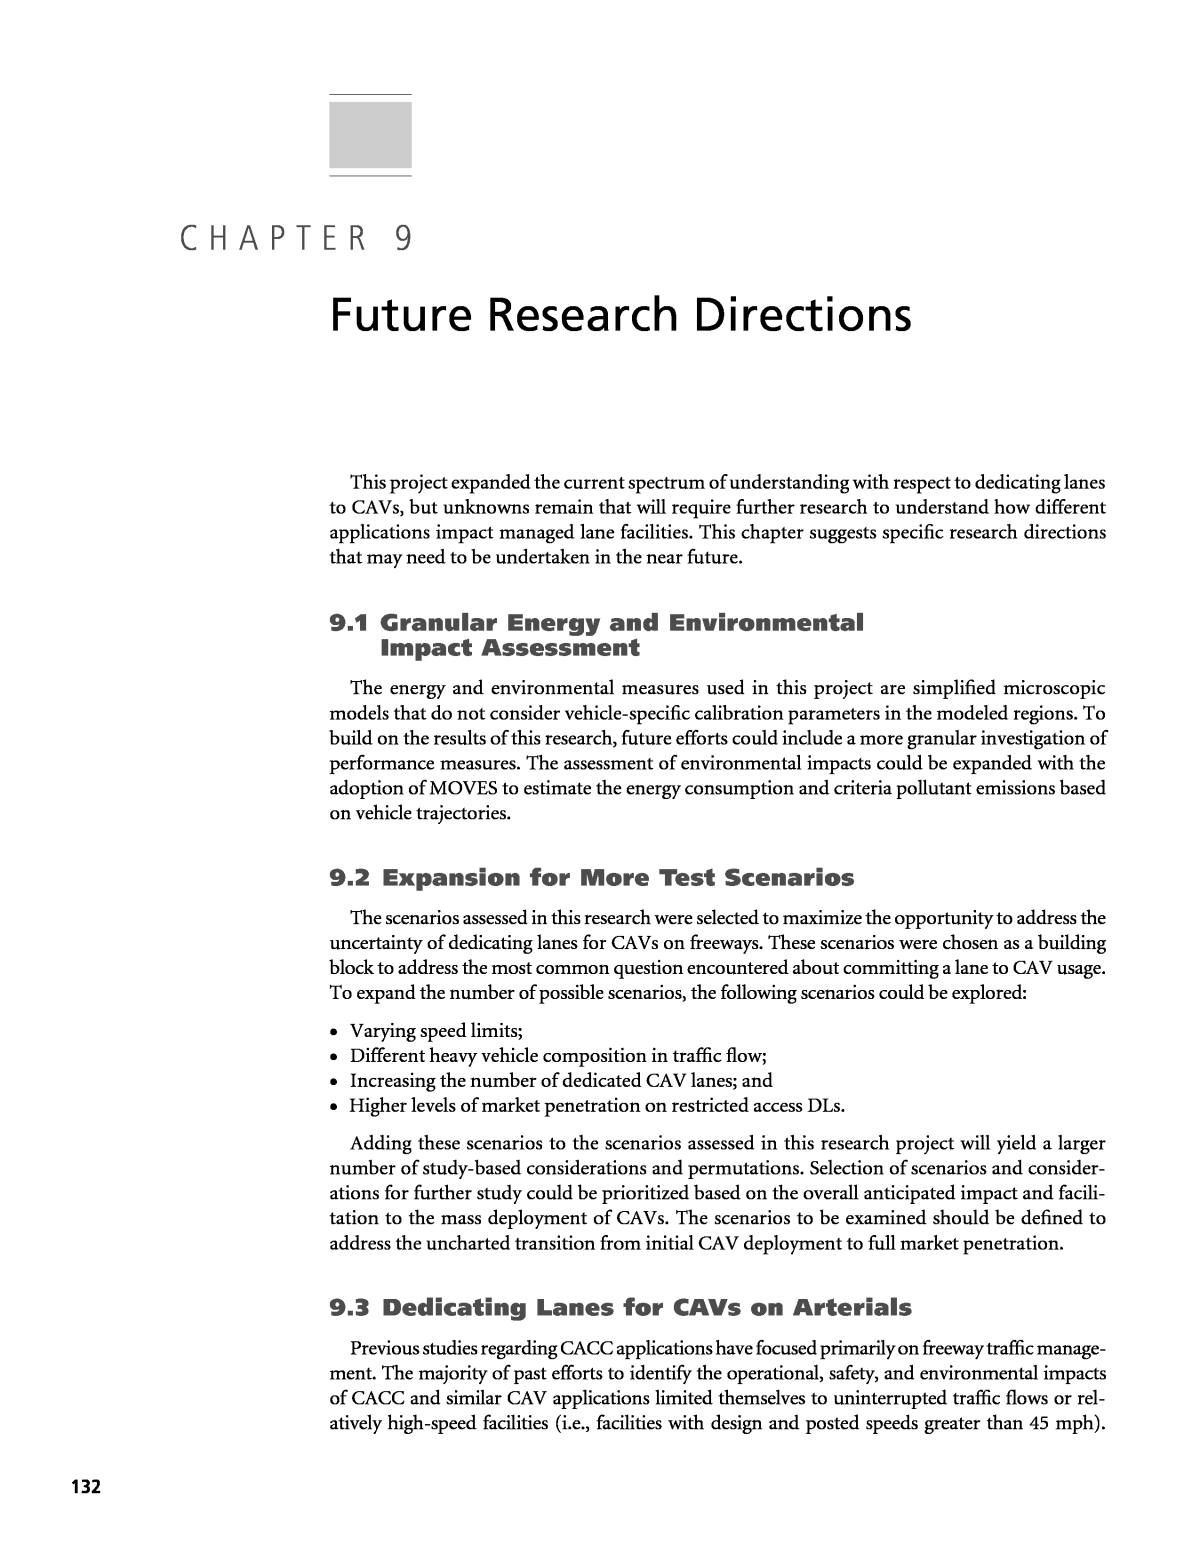 future research directions suggested